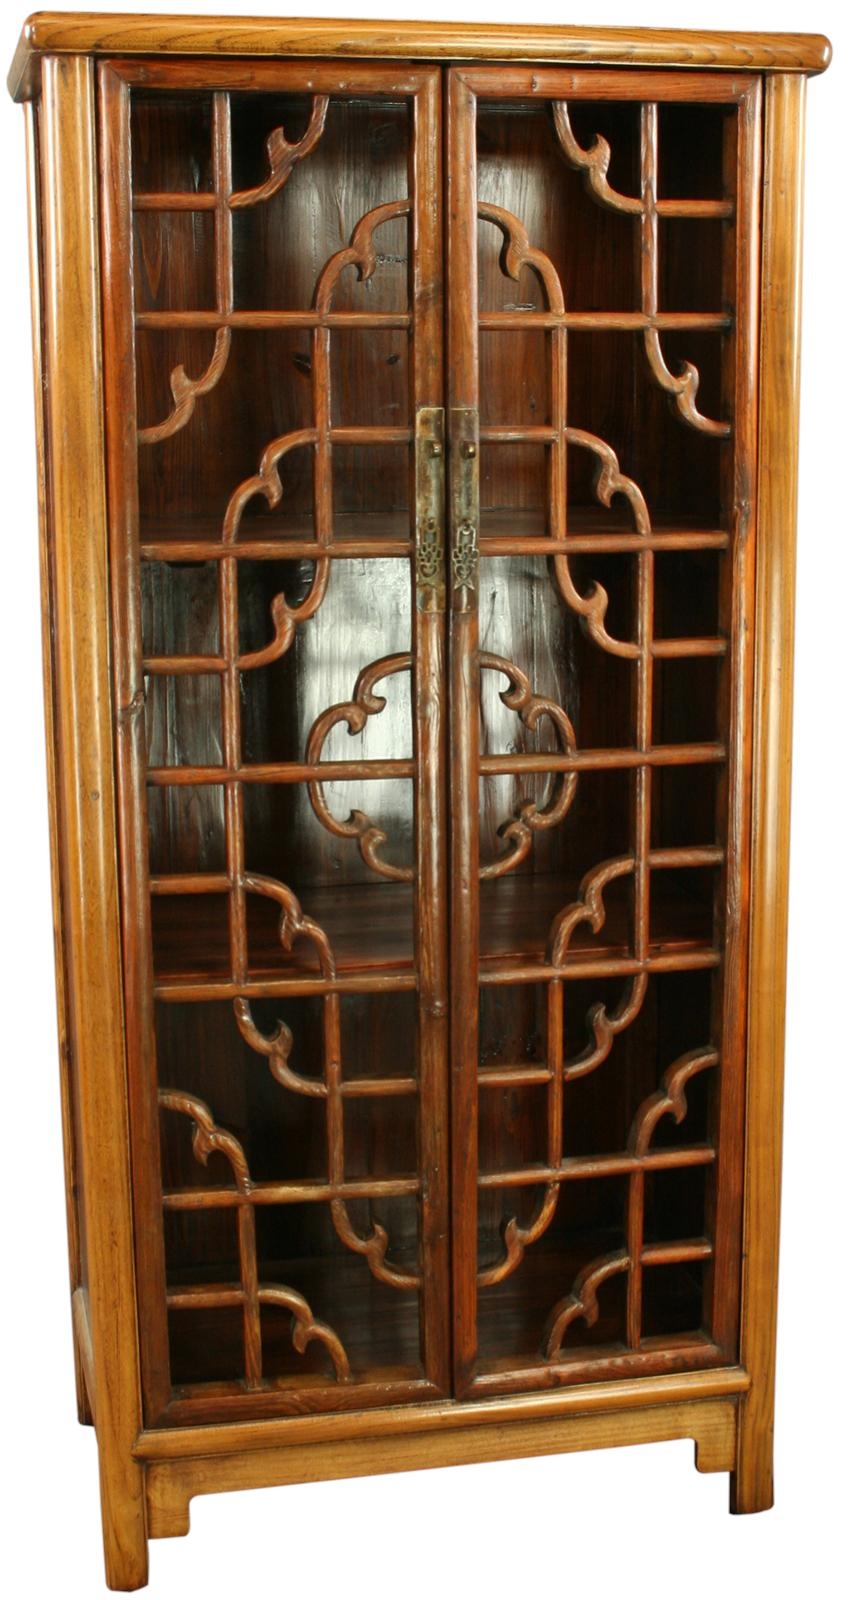 Consigned Antique Chinese Geometrical Bookcase Display Asian Bookcases Cabinets And Computer Armoires